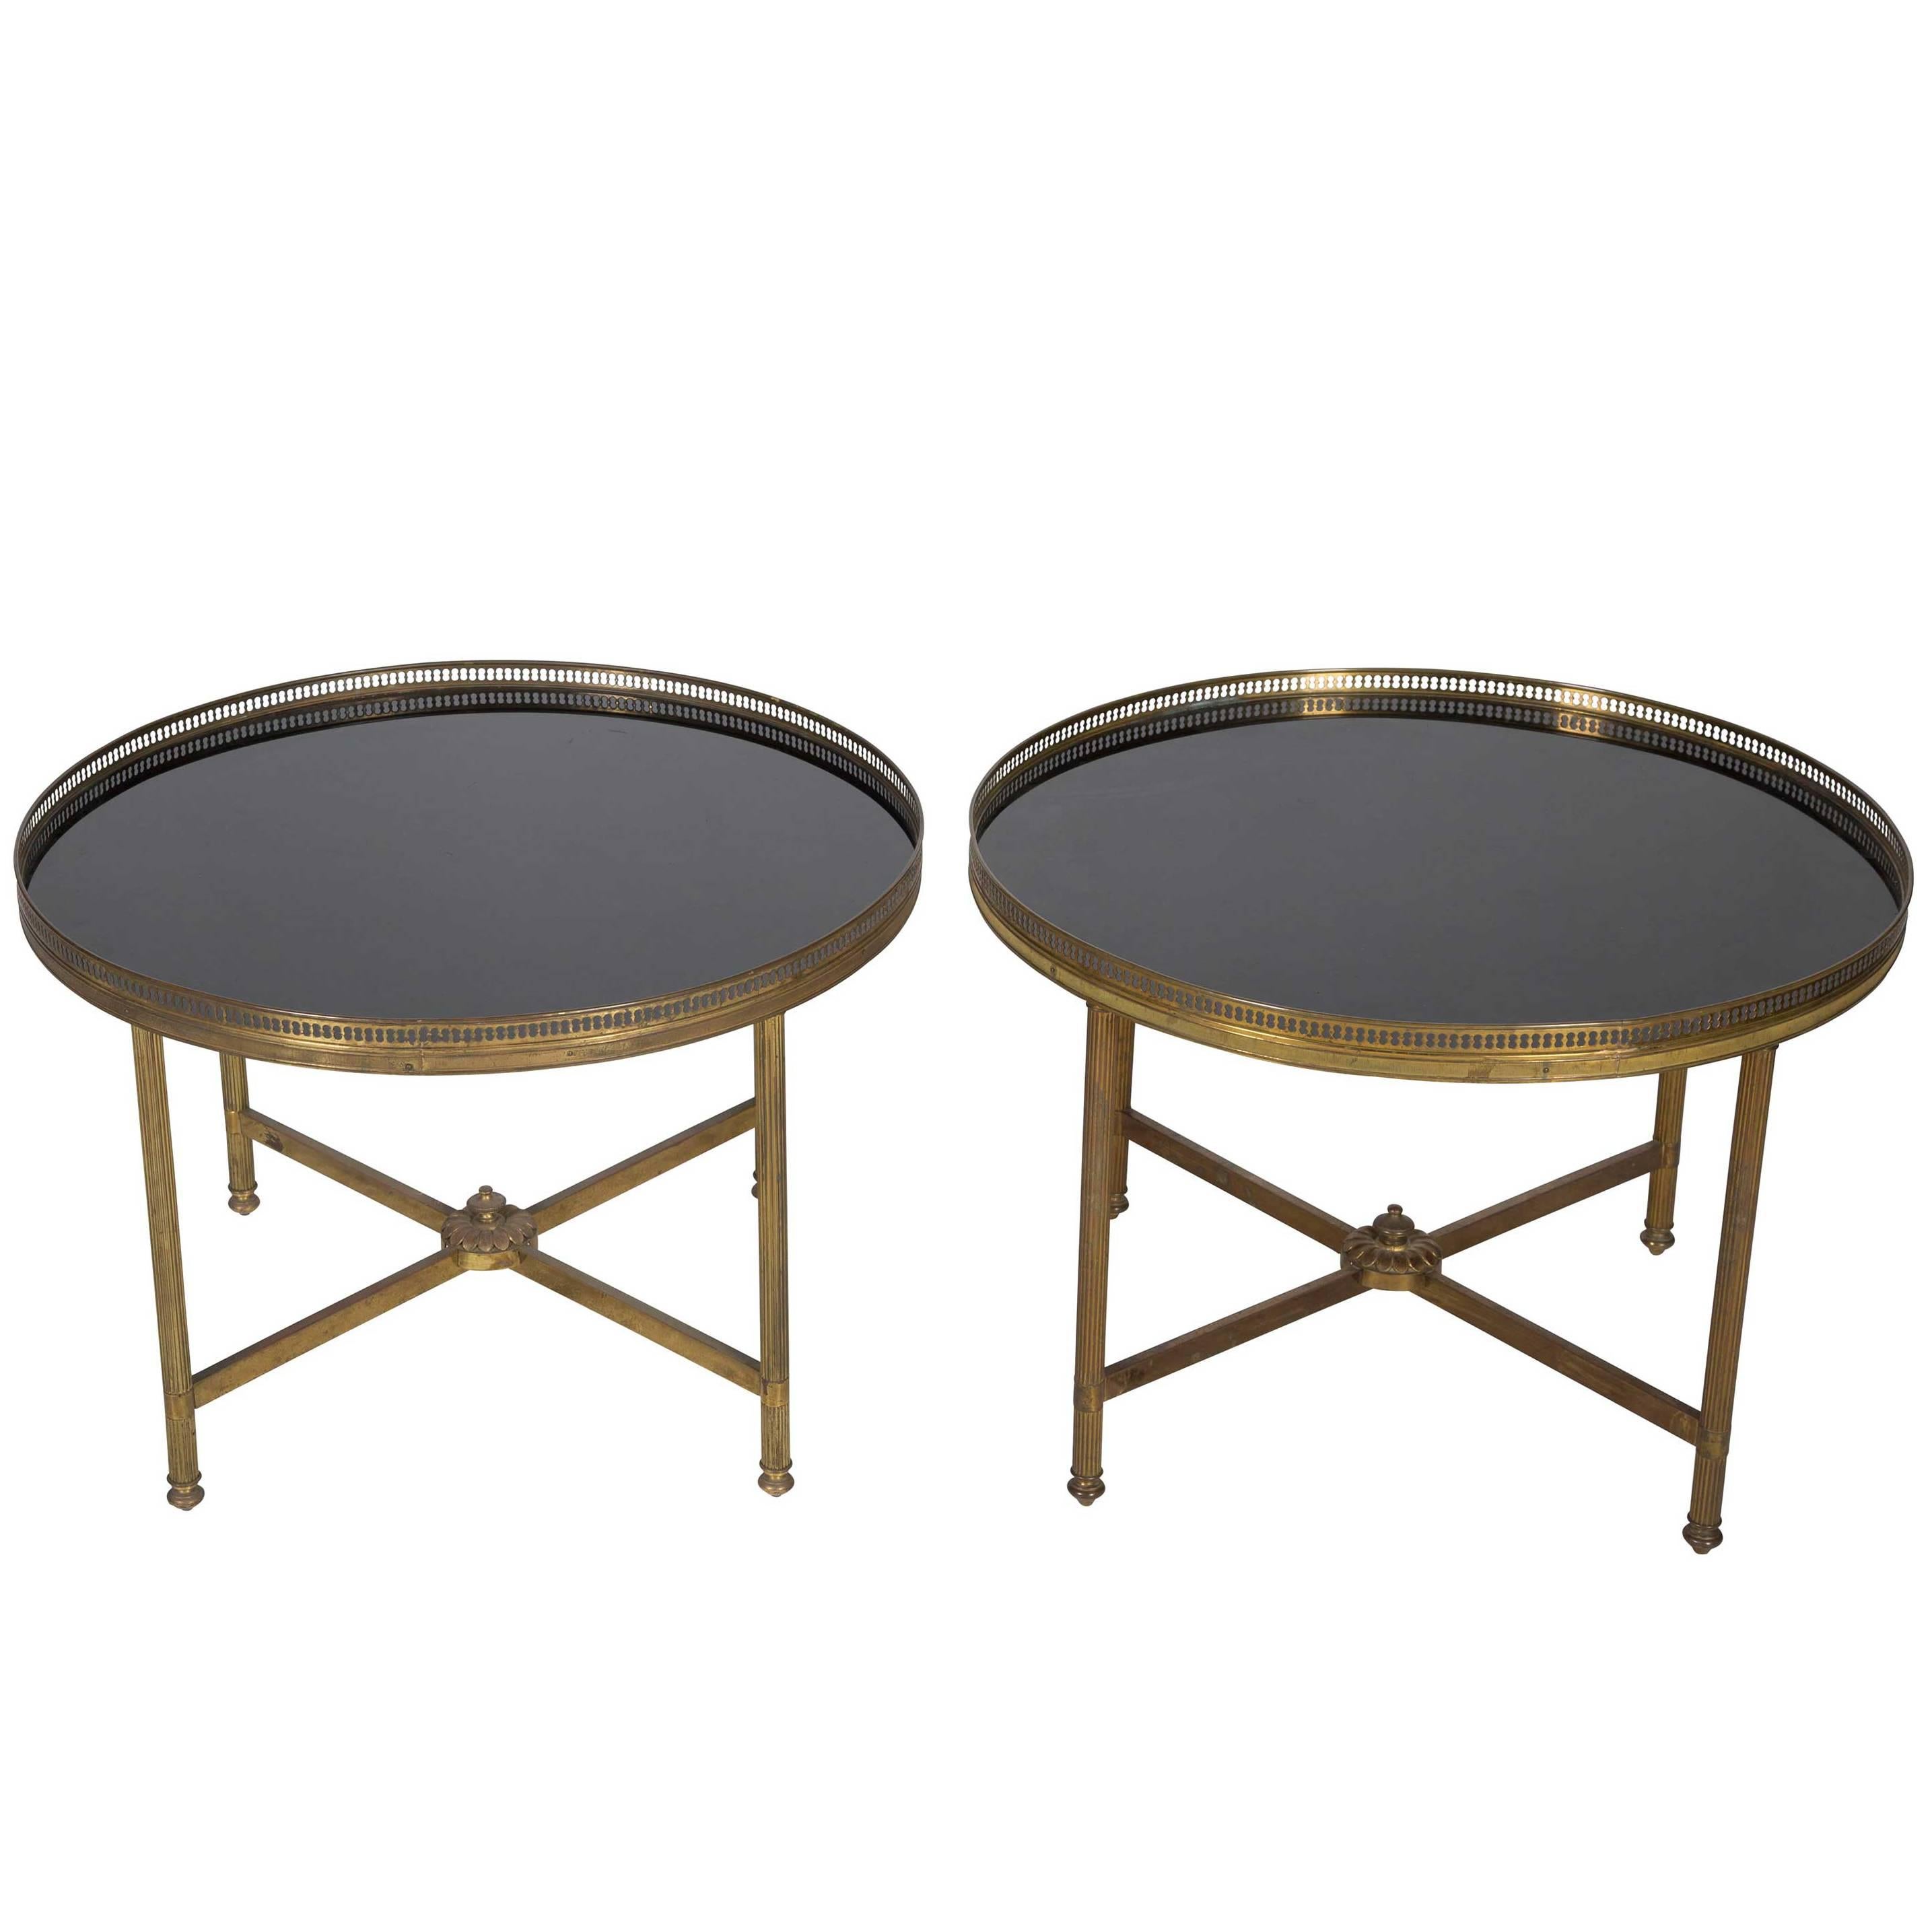 Pair of French Sofa Tables